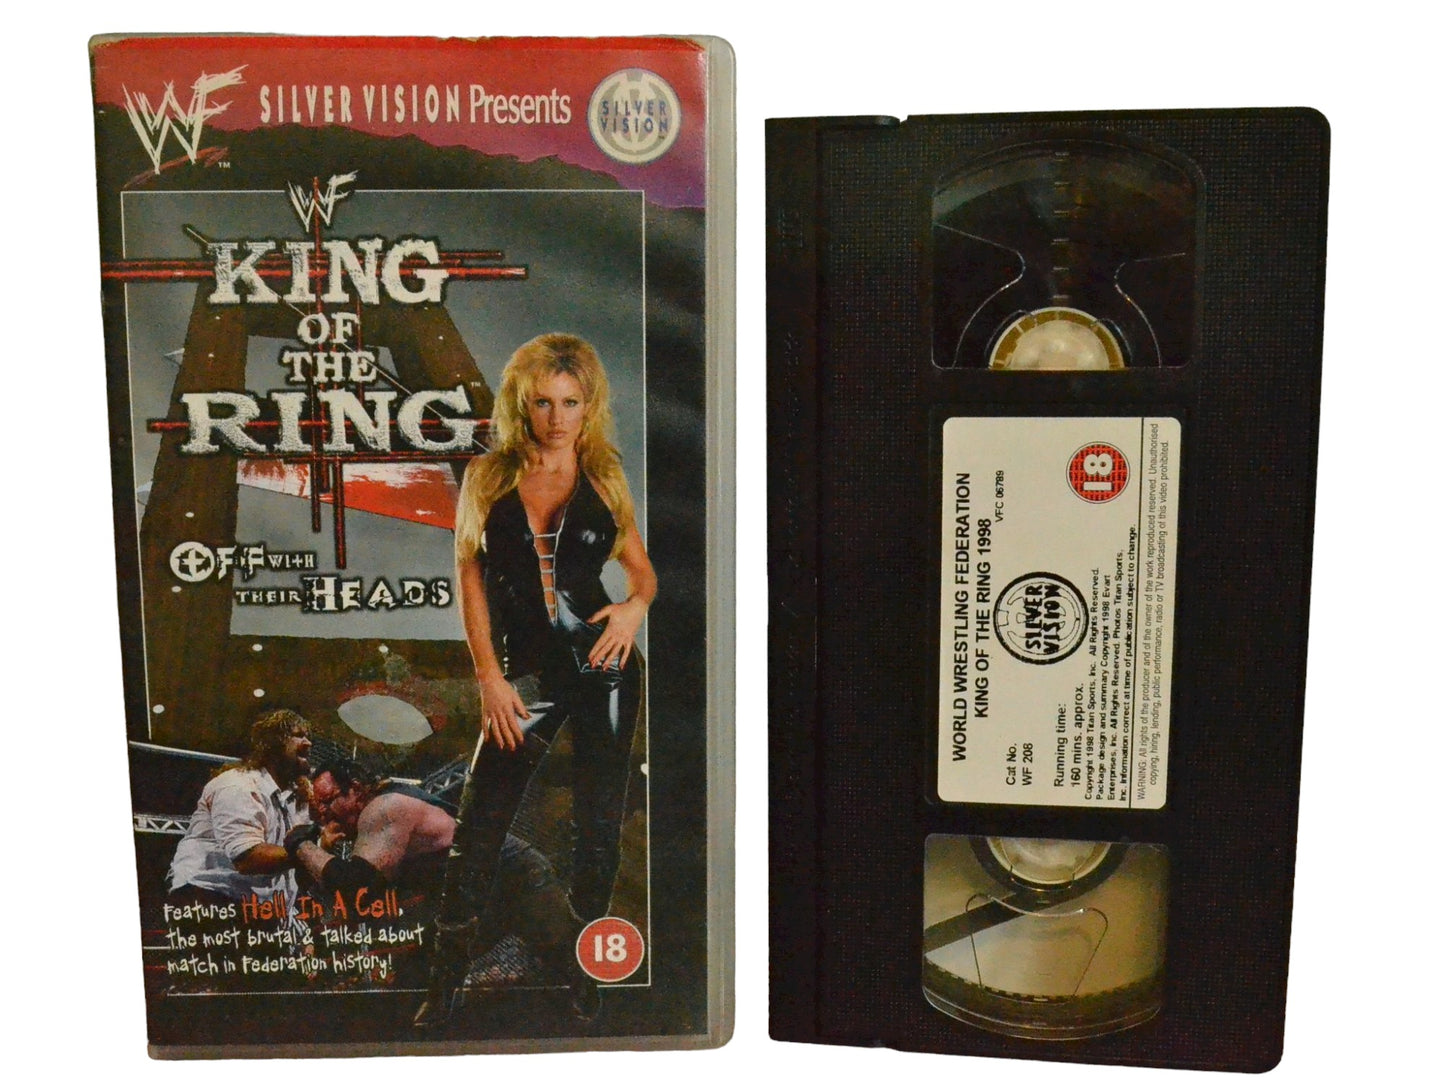 WWF: King Of The Ring (Off with their Heads) - Kevin Dunn - World Wrestling Federation Home Video - Wrestling - PAL - VHS-